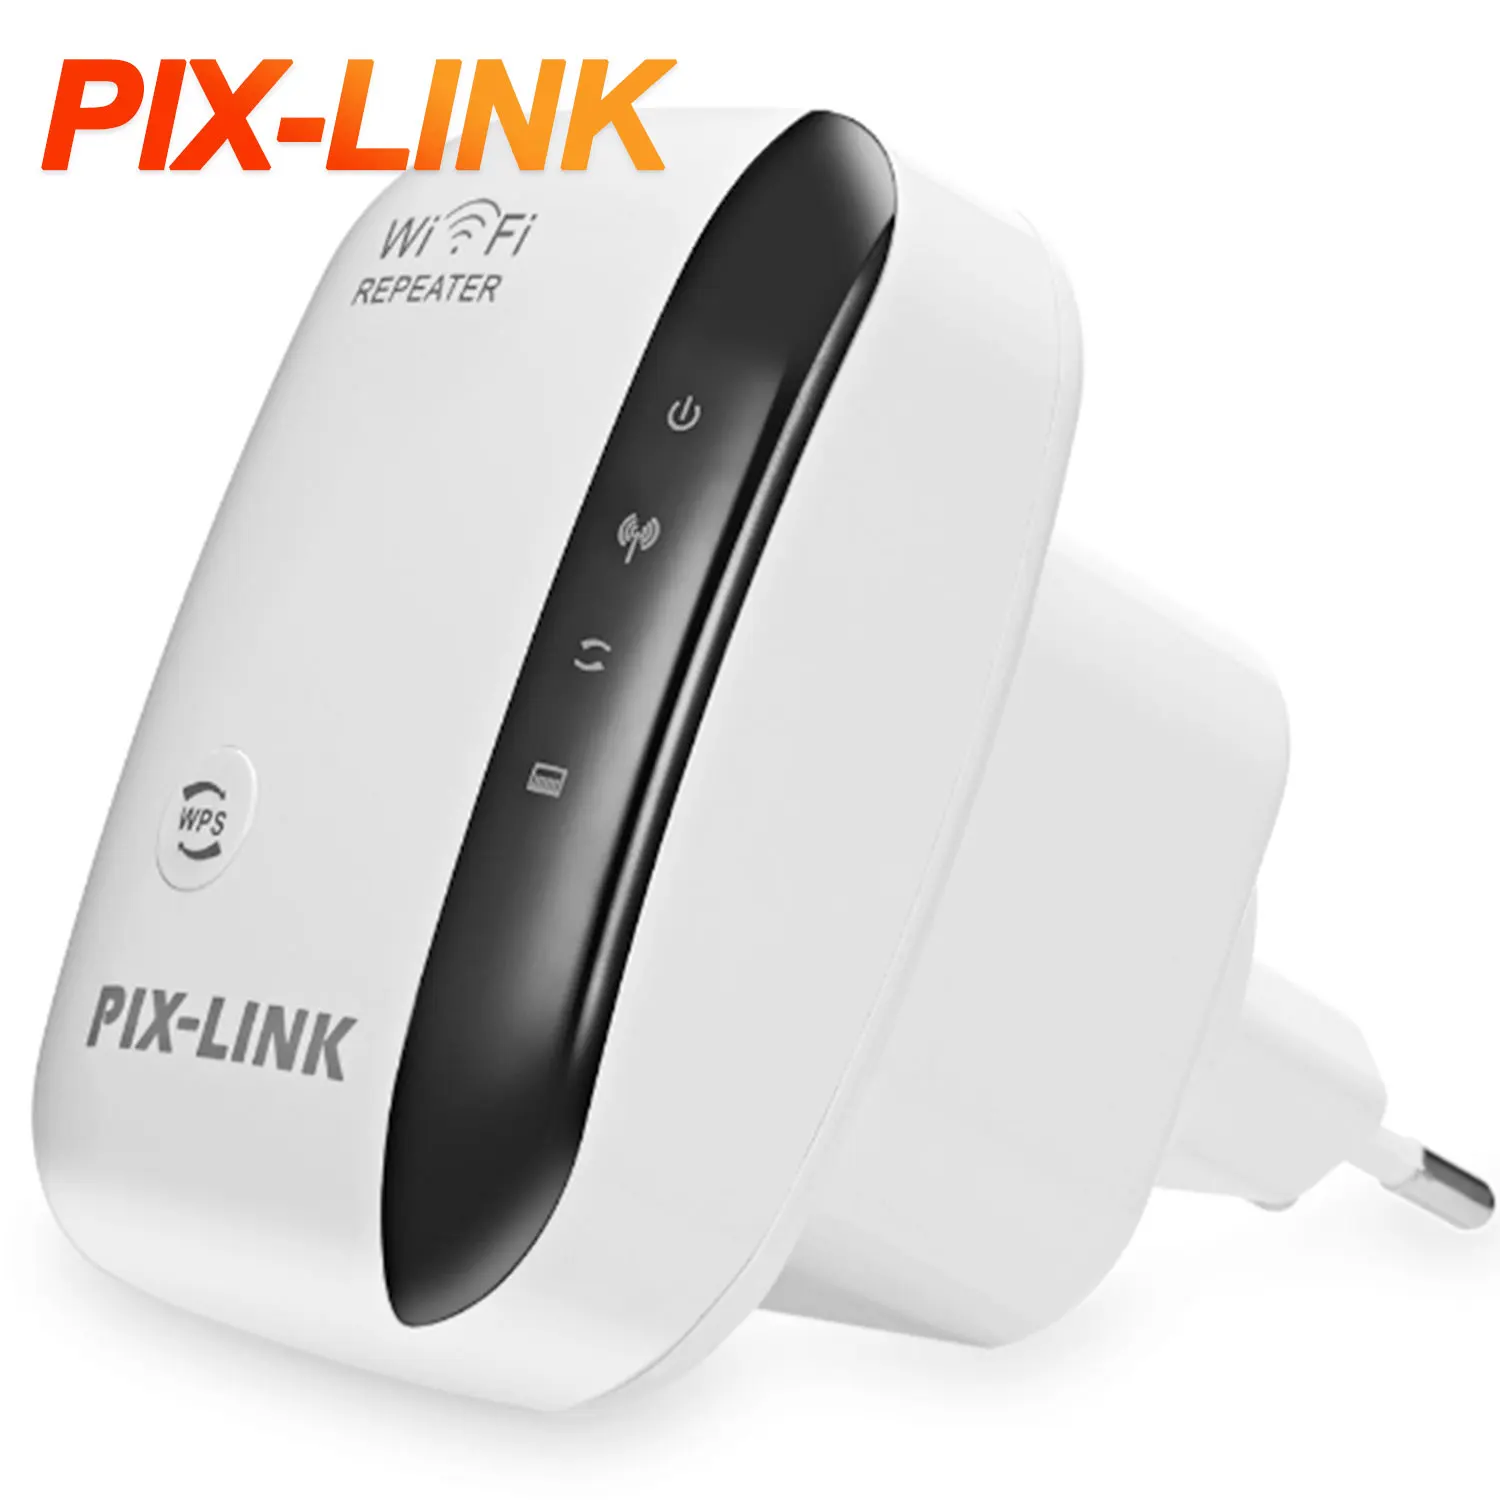 

PIX-LINK Wireless Signal 300Mbps Booster 1 Lan Port AP Wifi Repeater Extender Mini Router With CE FCC RoHS certification, White+black